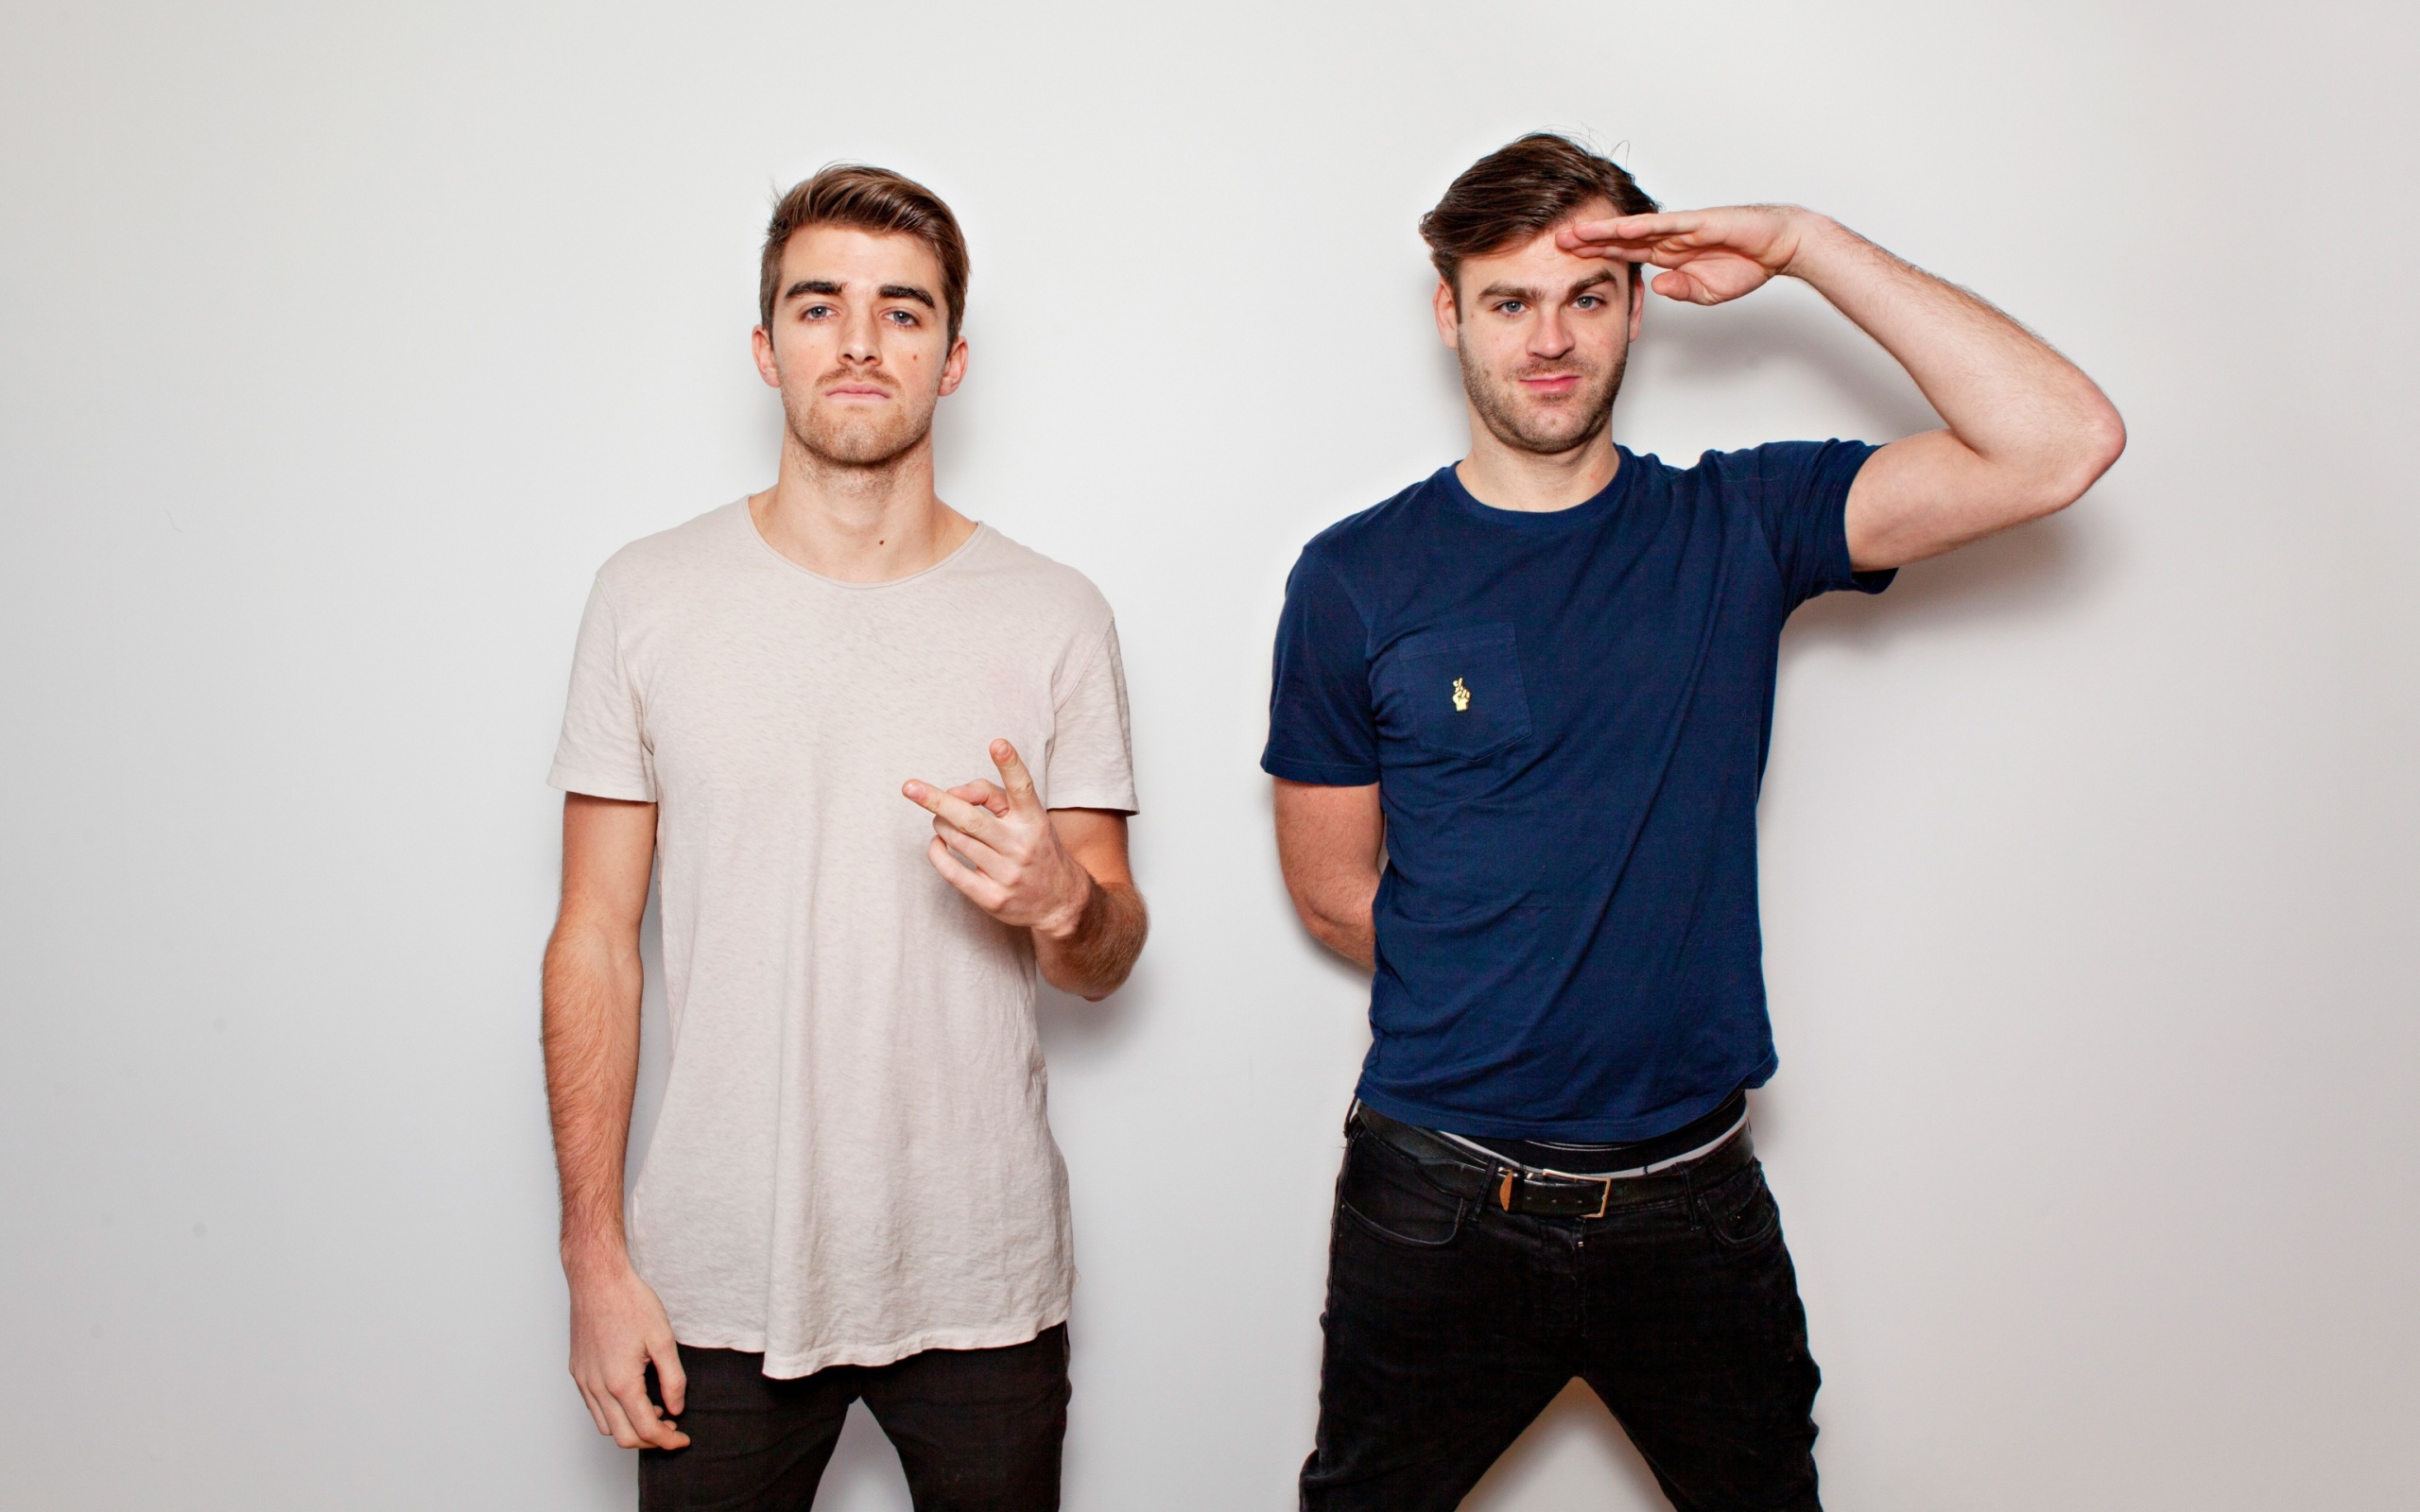 The Chainsmokers with Andrew Taggart and Alex Pall screenshot #1 2560x1600